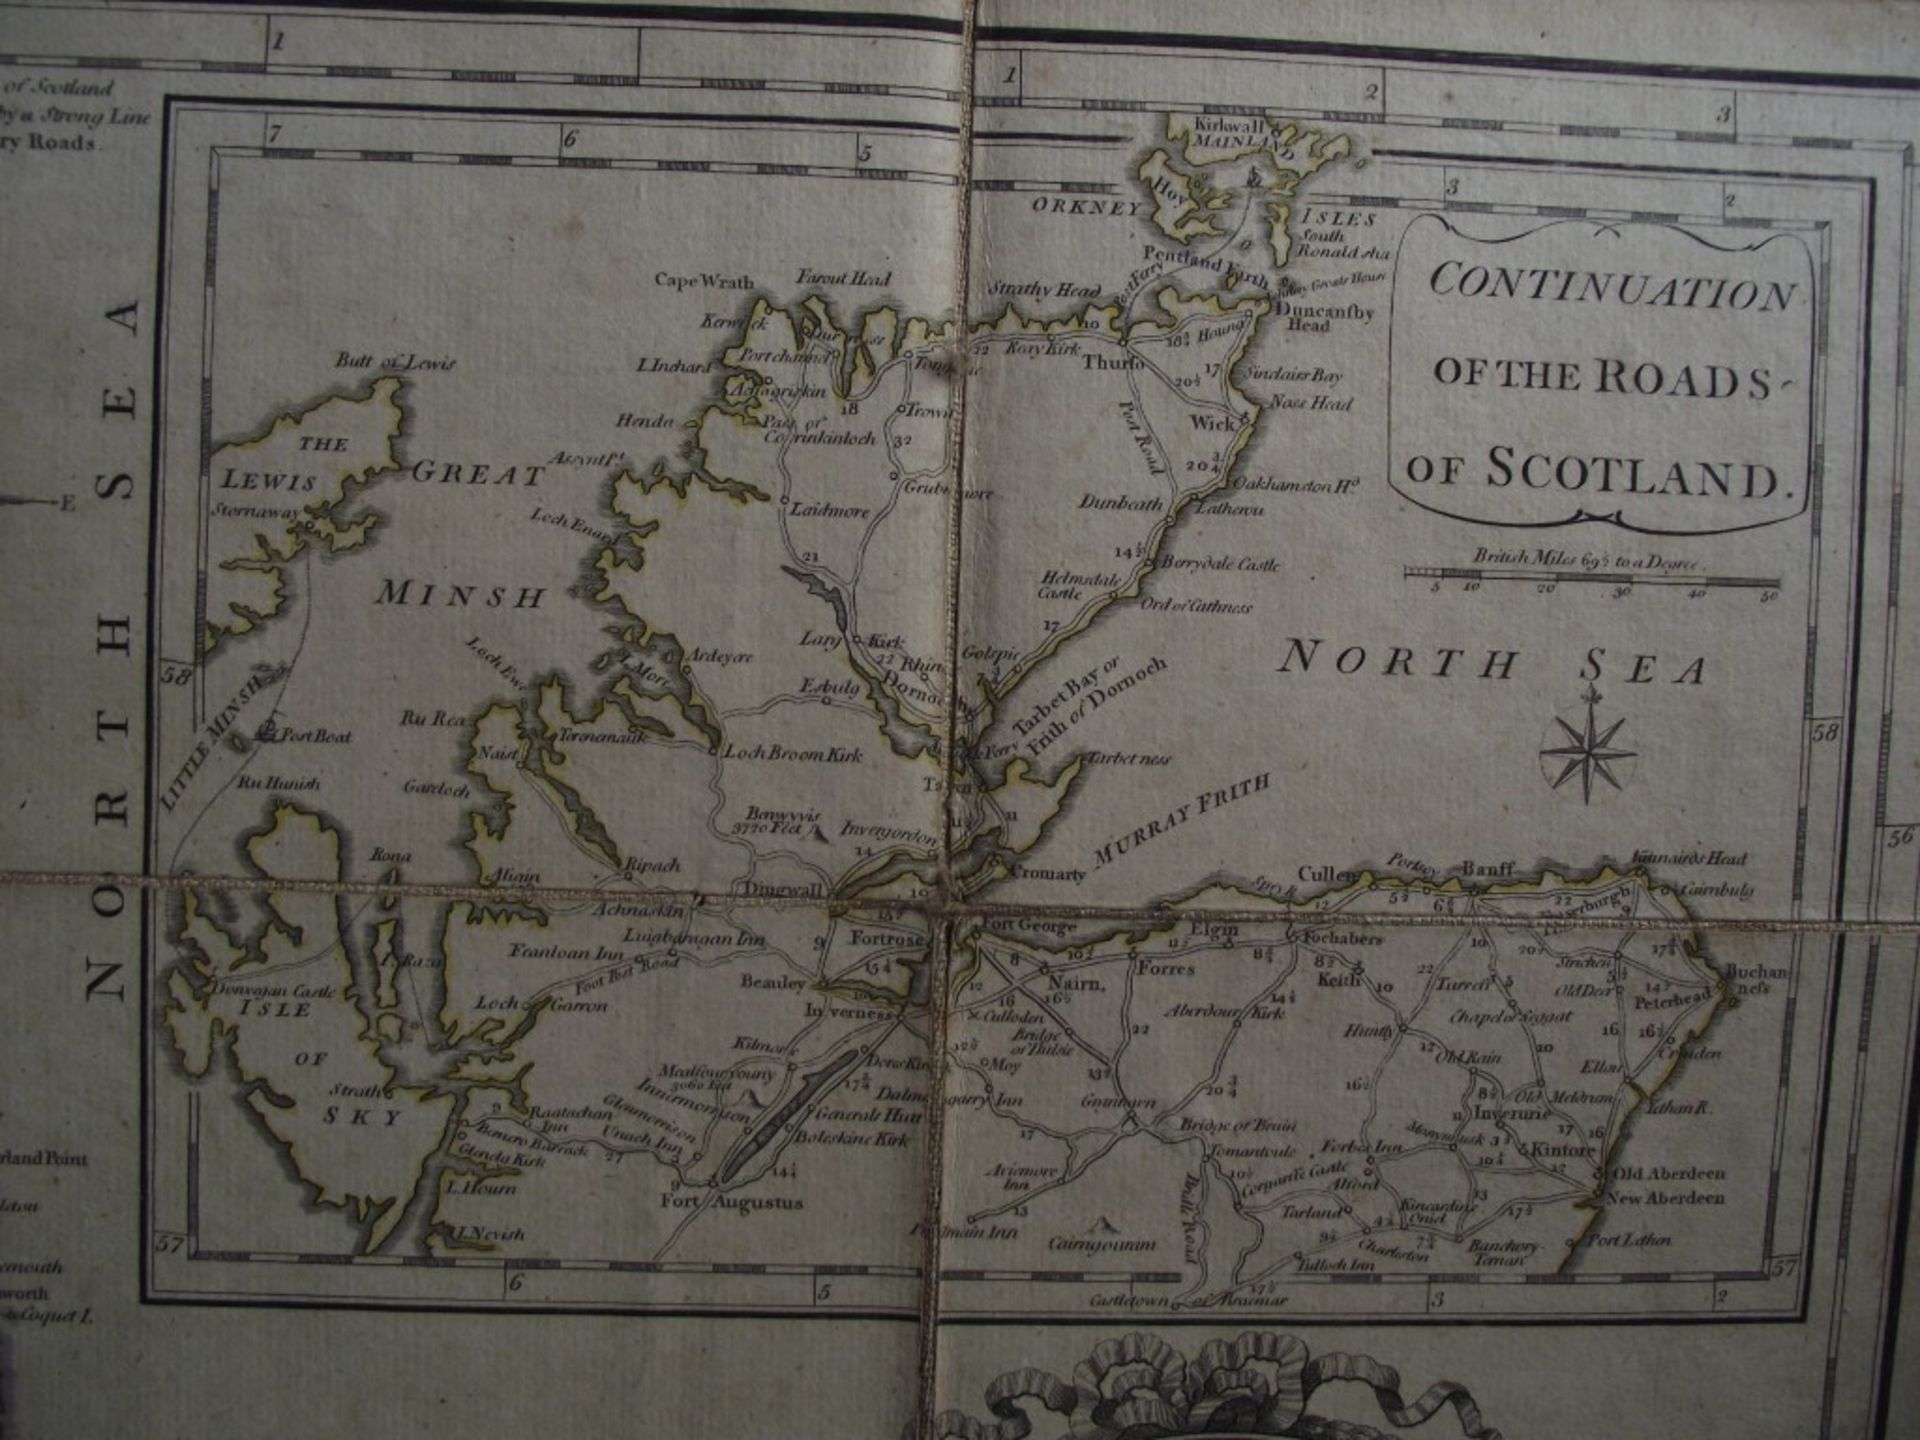 A New Map of The Roads of England and Scotland - Laurie & Whittle - 1794 - With Original Case - Image 24 of 32